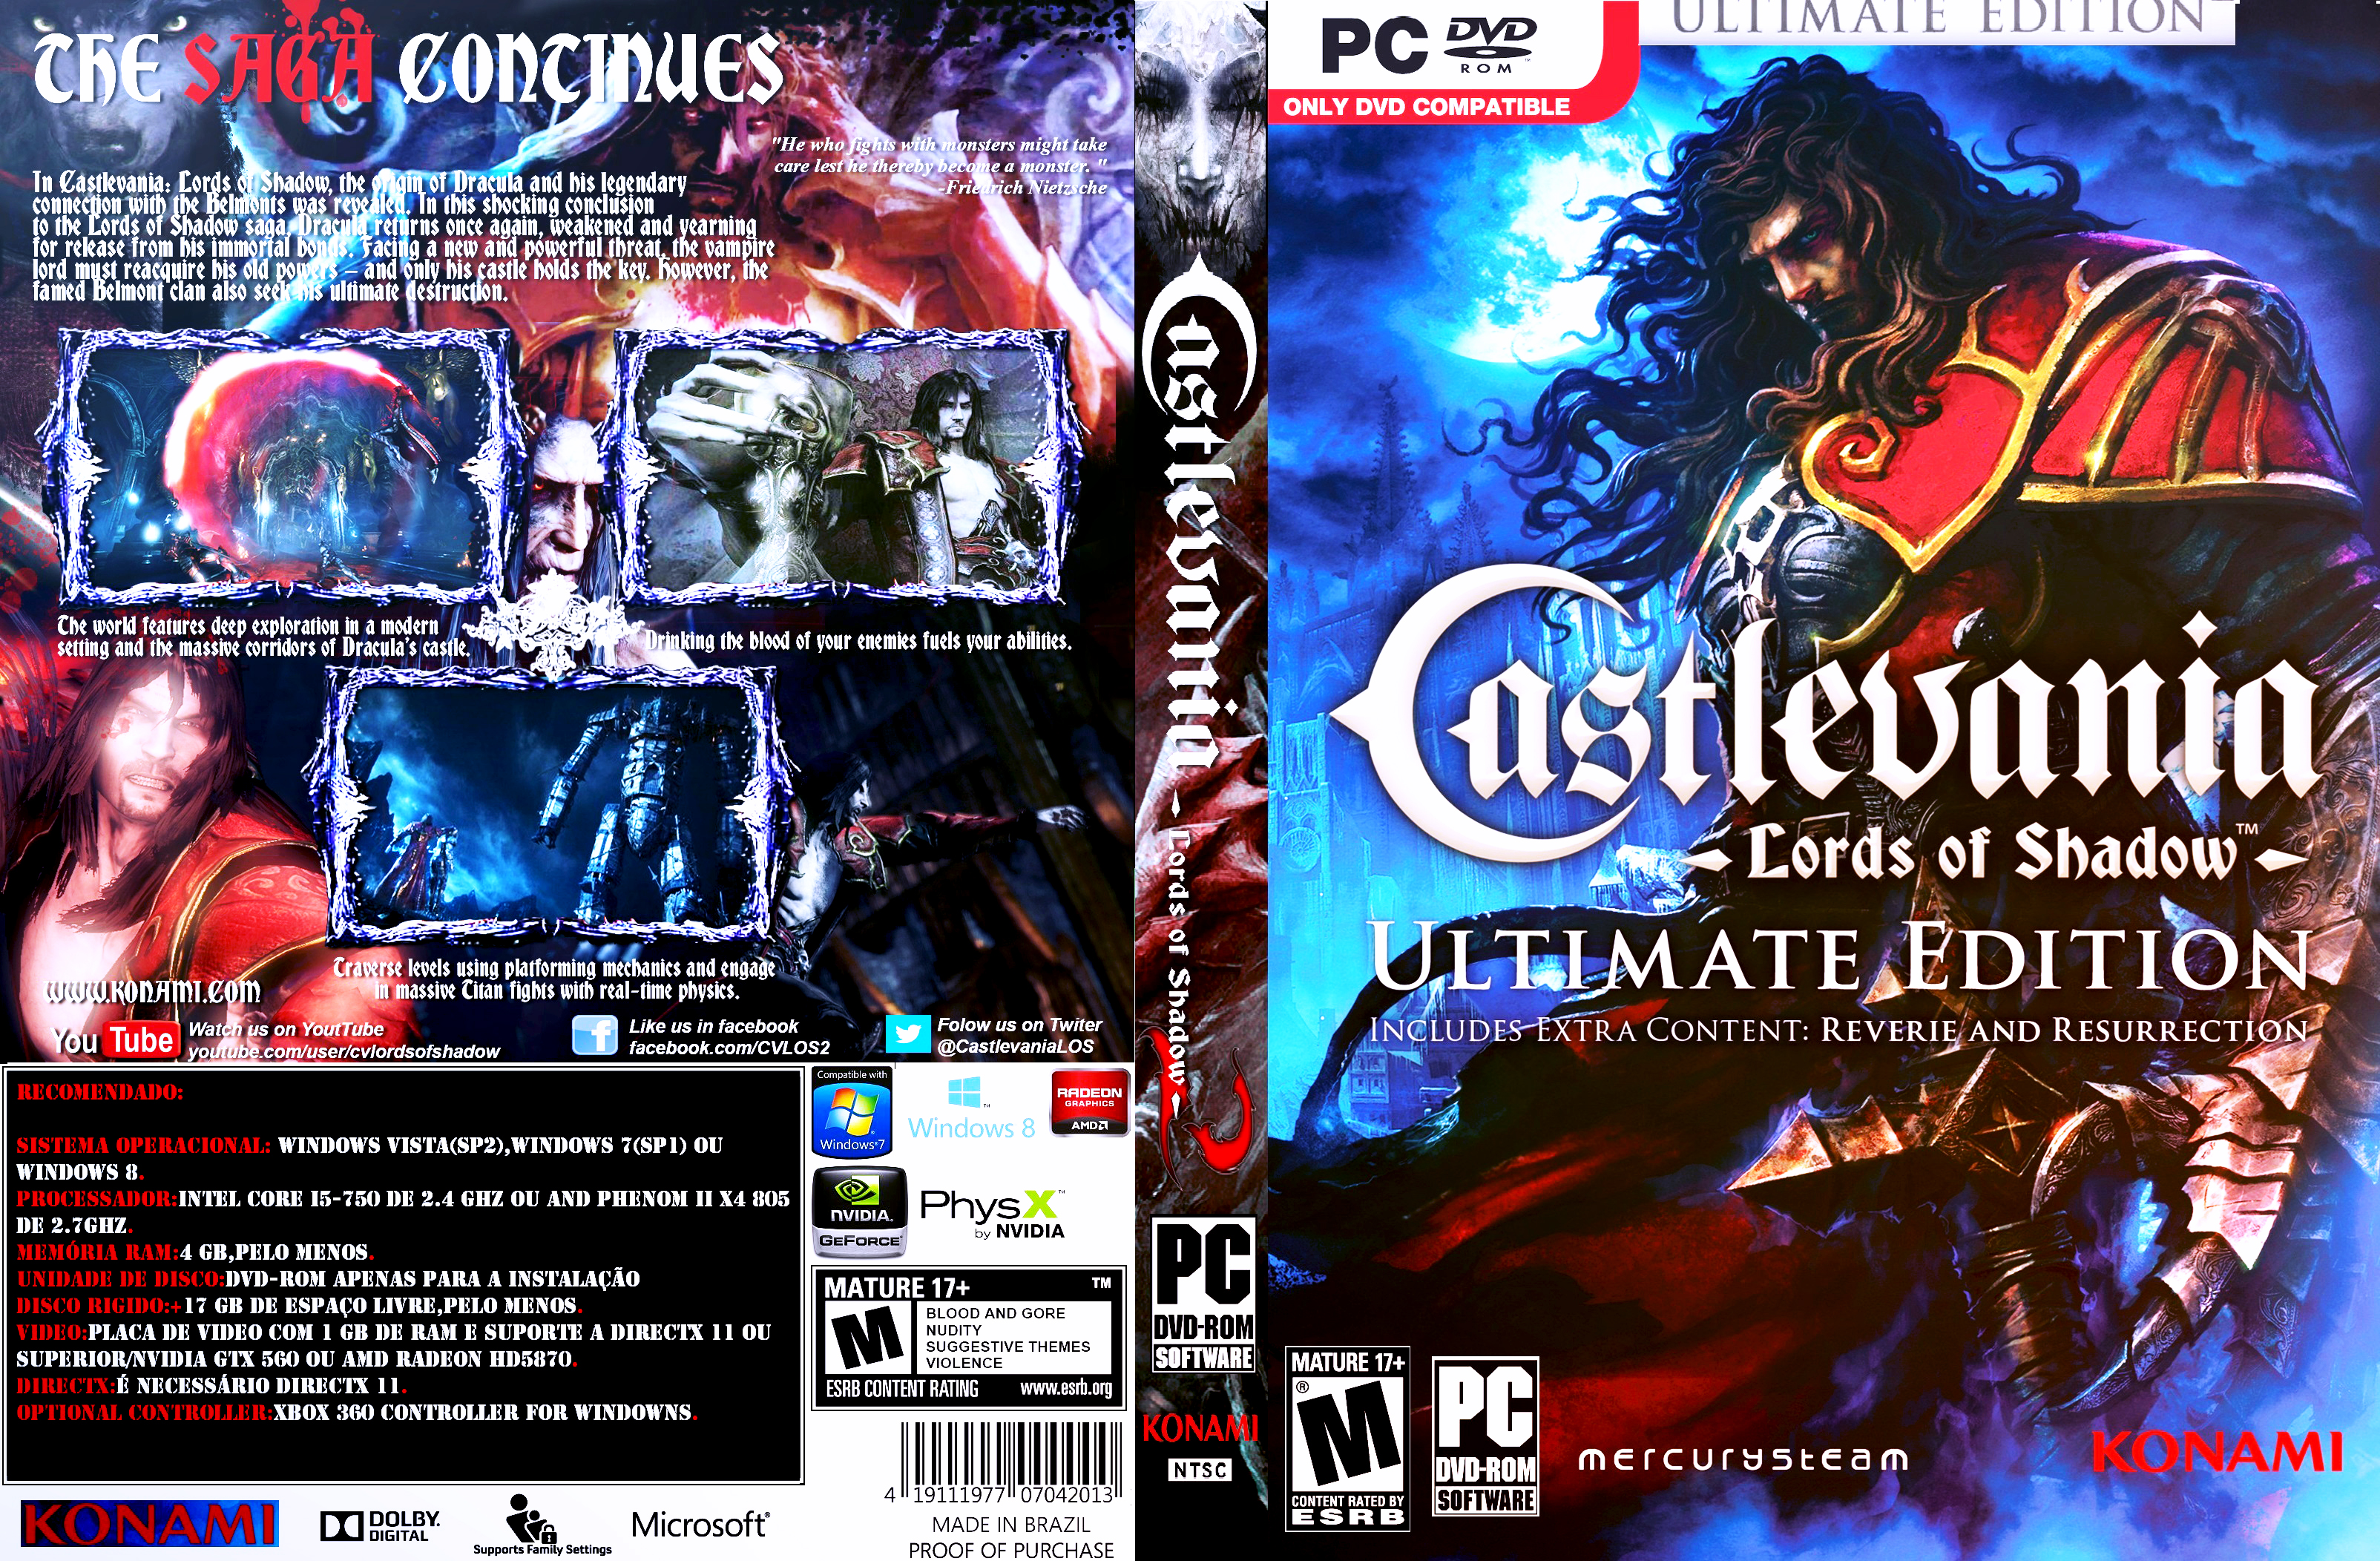 Castlevania Lords of Shadow – Ultimate Edition